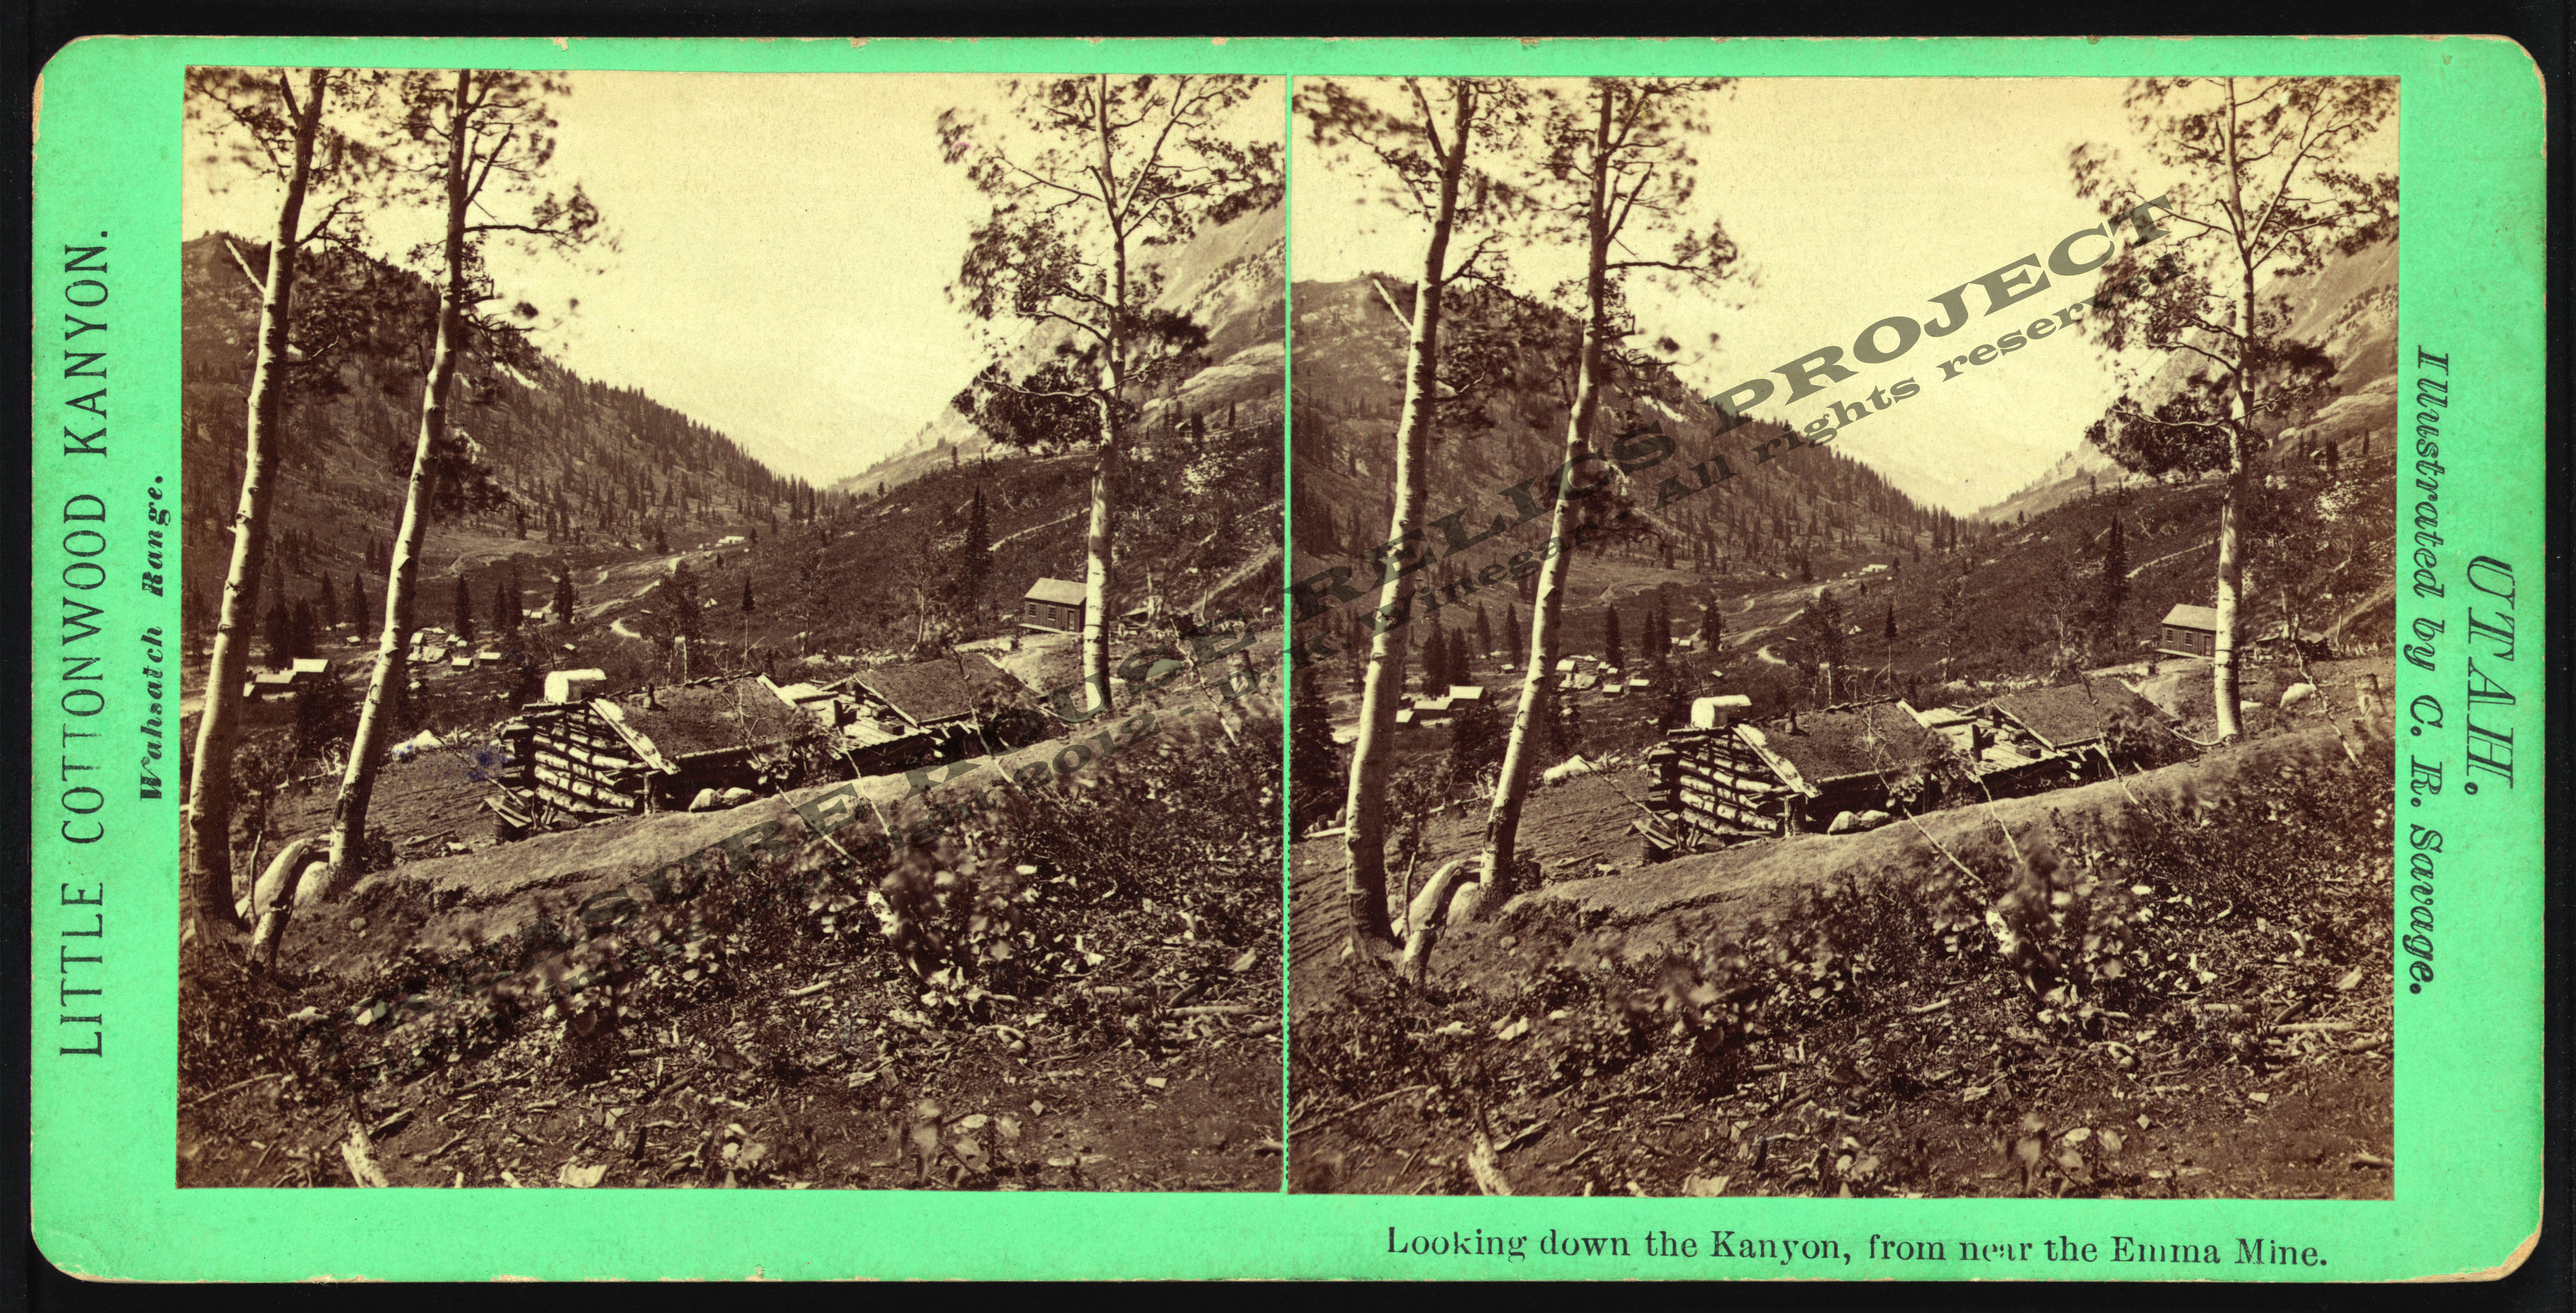 STEREOVIEW_-_LOOKING_DOWN_THE_CANYON_FROM_NEAR_THE_EMMA_MINE_-_A_-_C_R_SAVAGE_emboss.jpg